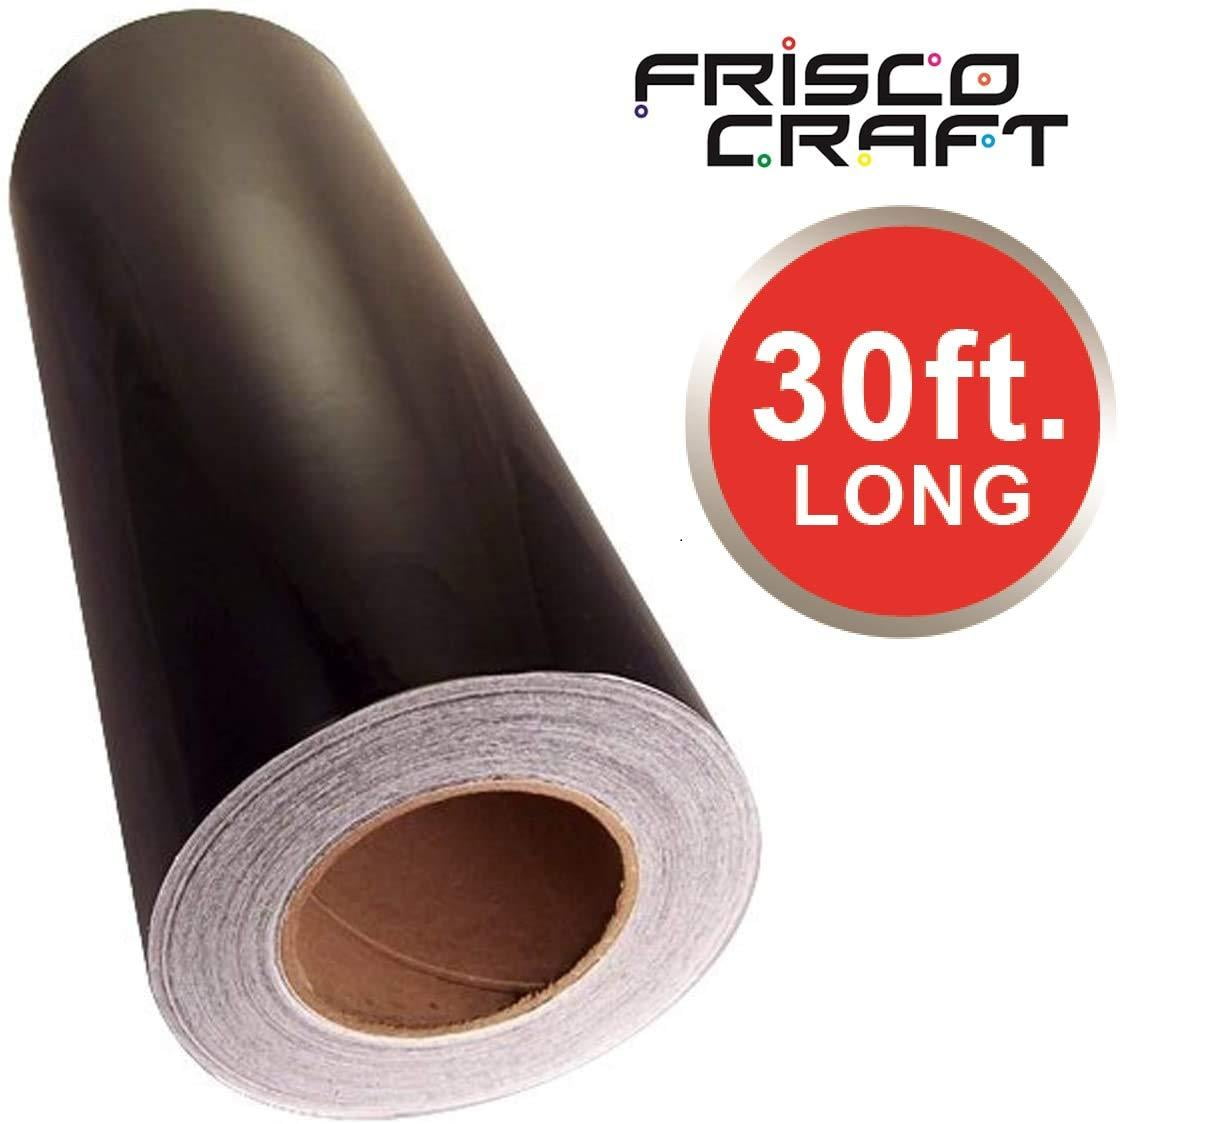 Frisco Craft Stencil Vinyl, Blue Vinyl Sheets for Cutting Machine - 12 x  60 FT Adhesive Roll Cricut, Silhouette, Cameo Cutters, Signs, Scrapbooking